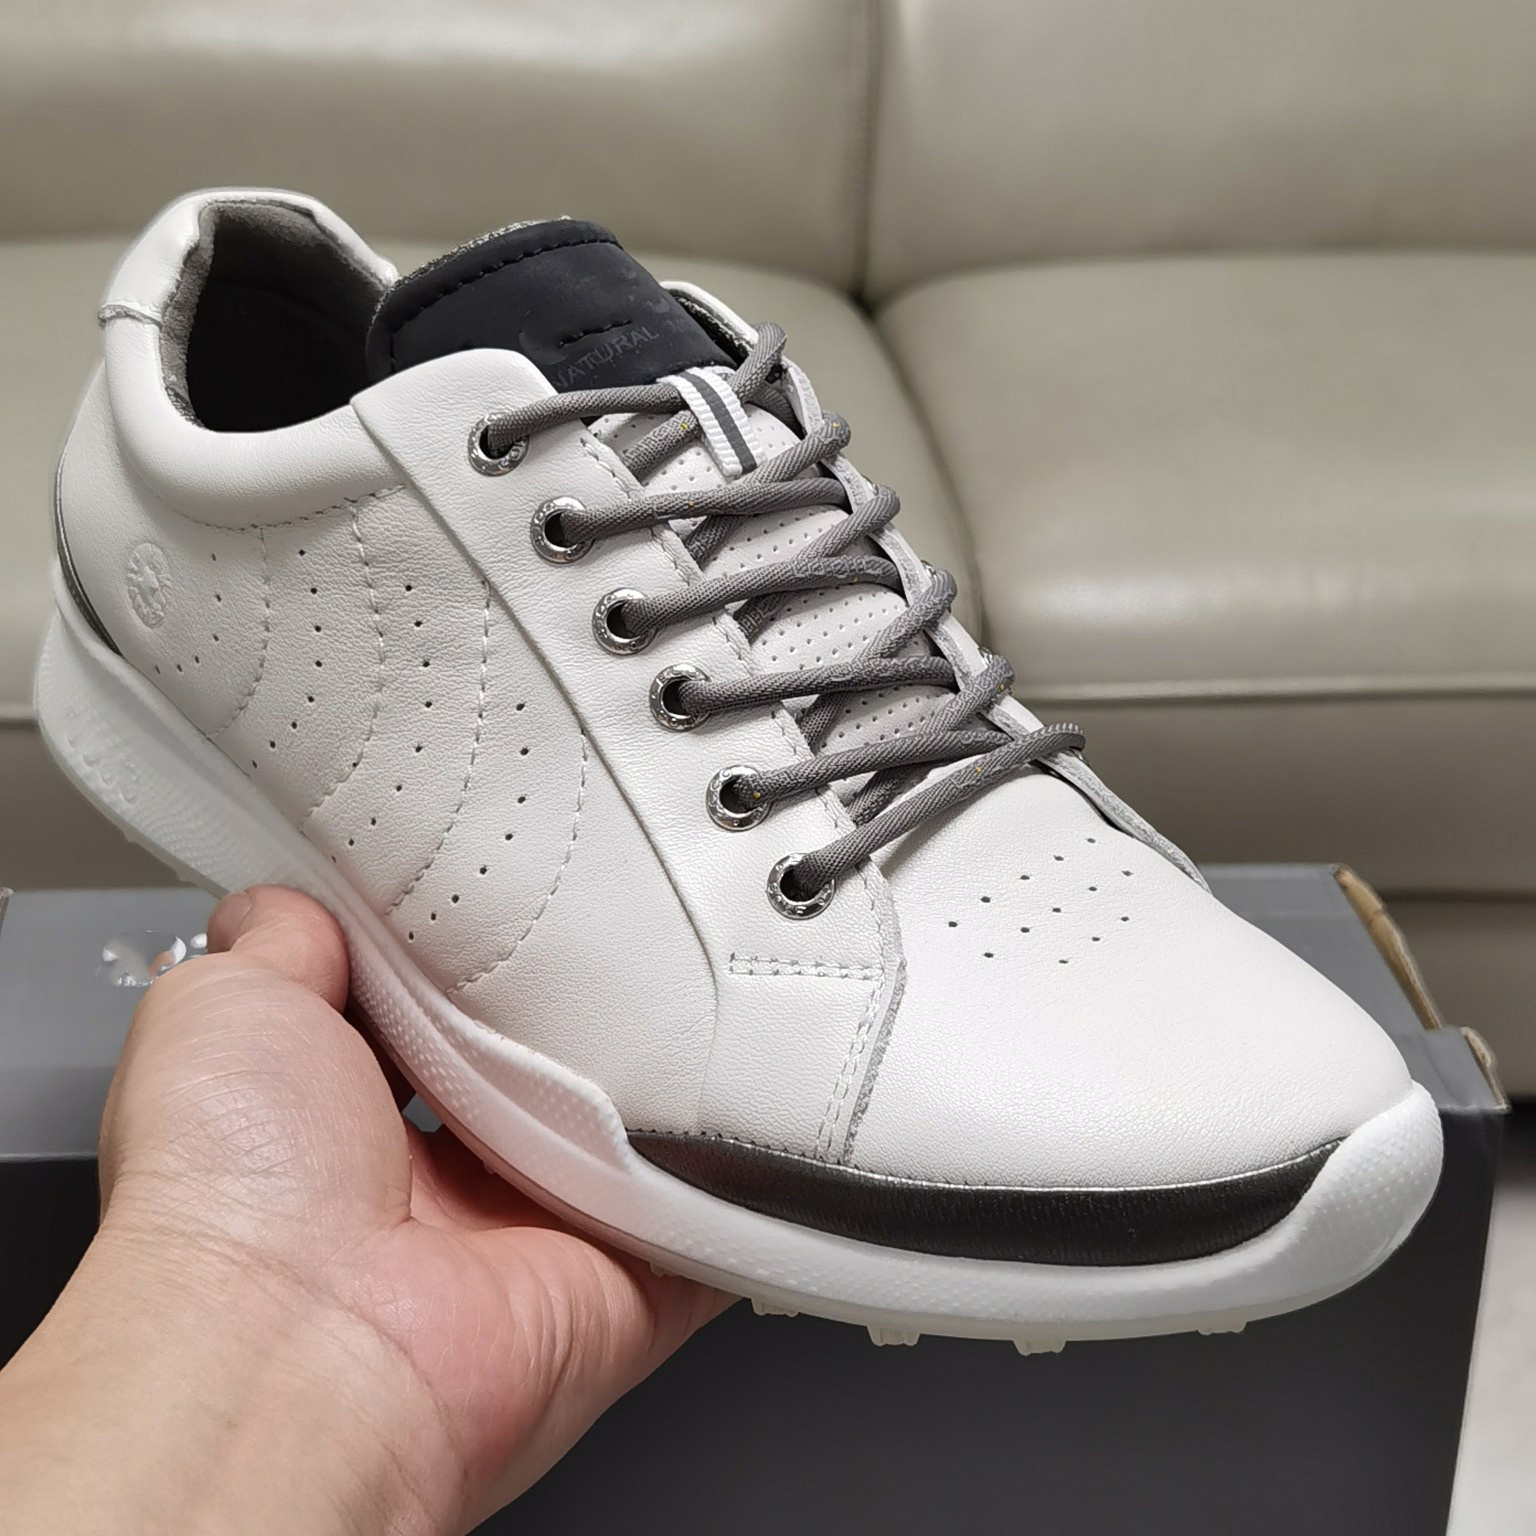 Genuine Leather Golf Shoes for Men Brand Golf Shoes Professional Sport Shoes Men's Walking Sport Sneakers for Golf Training Boys